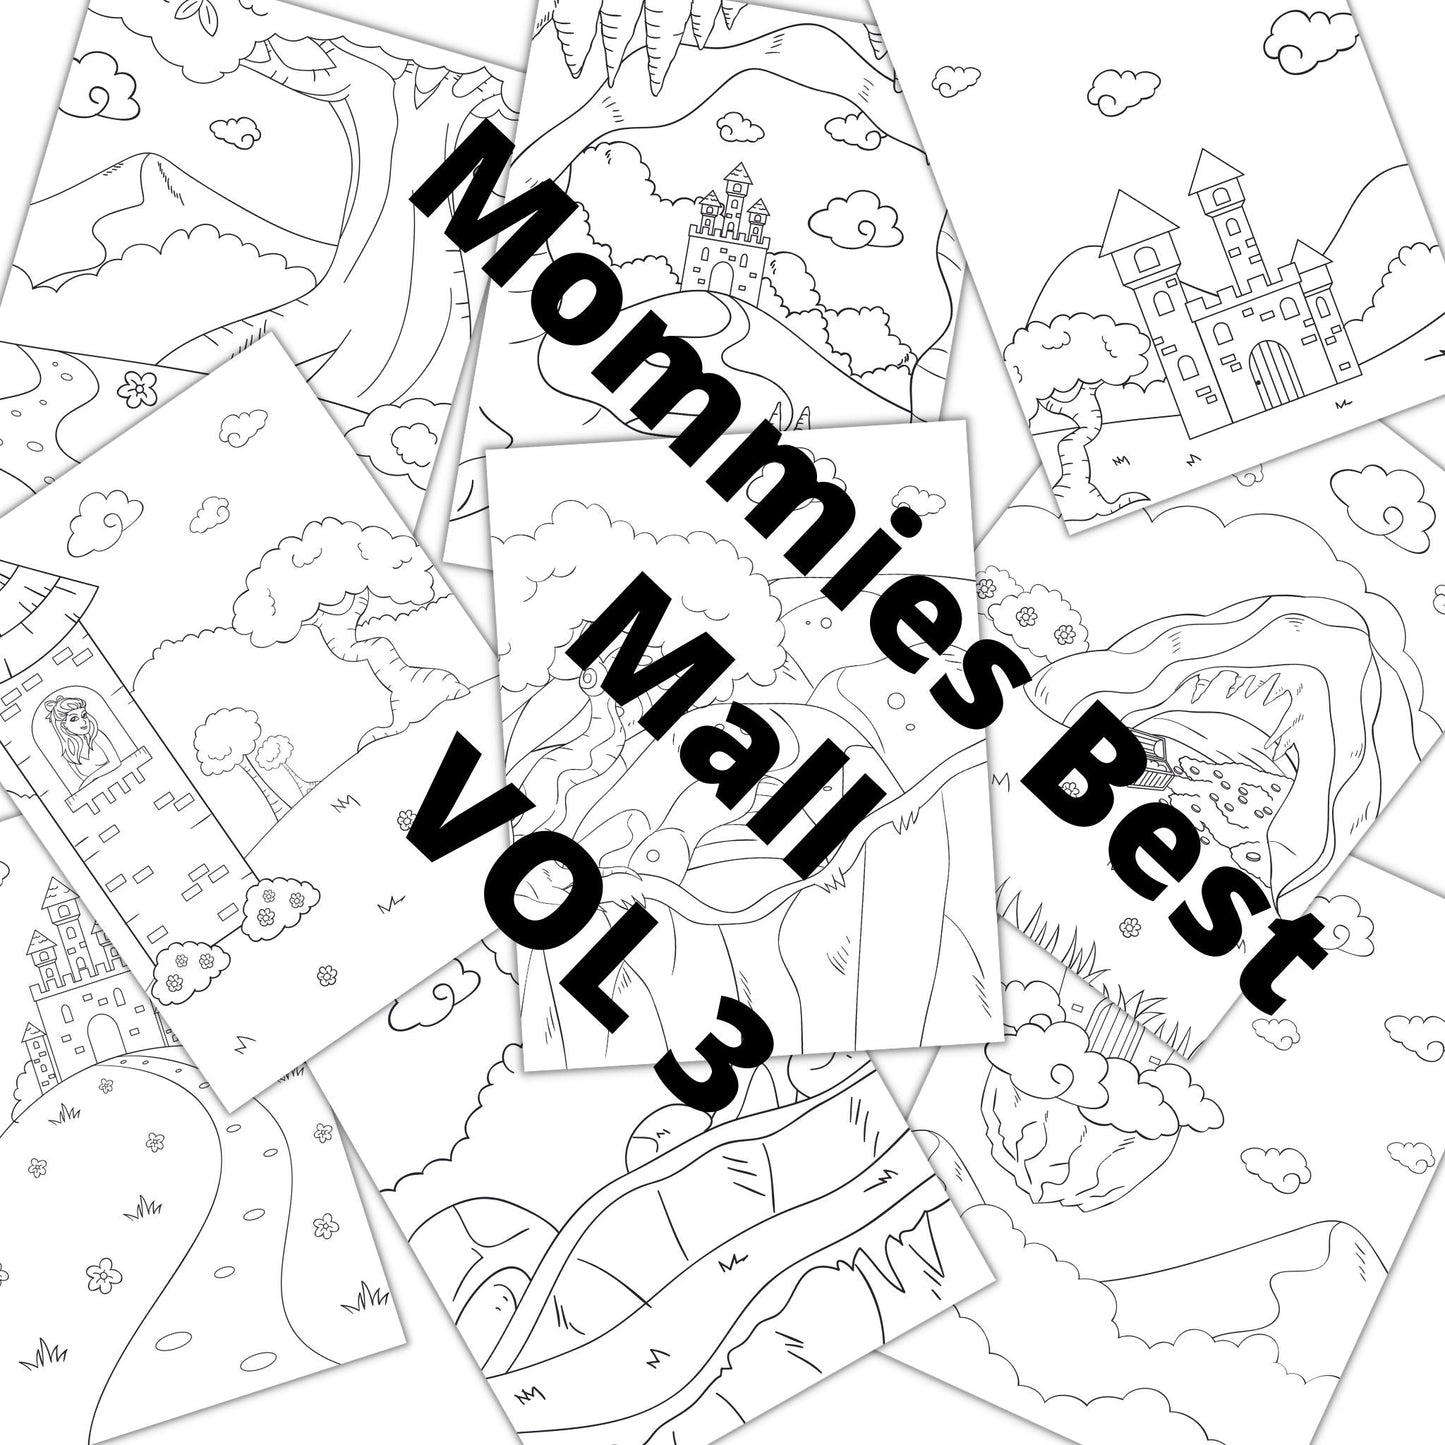 Baby Dragon Coloring - Coloring book - Mommies Best Mall